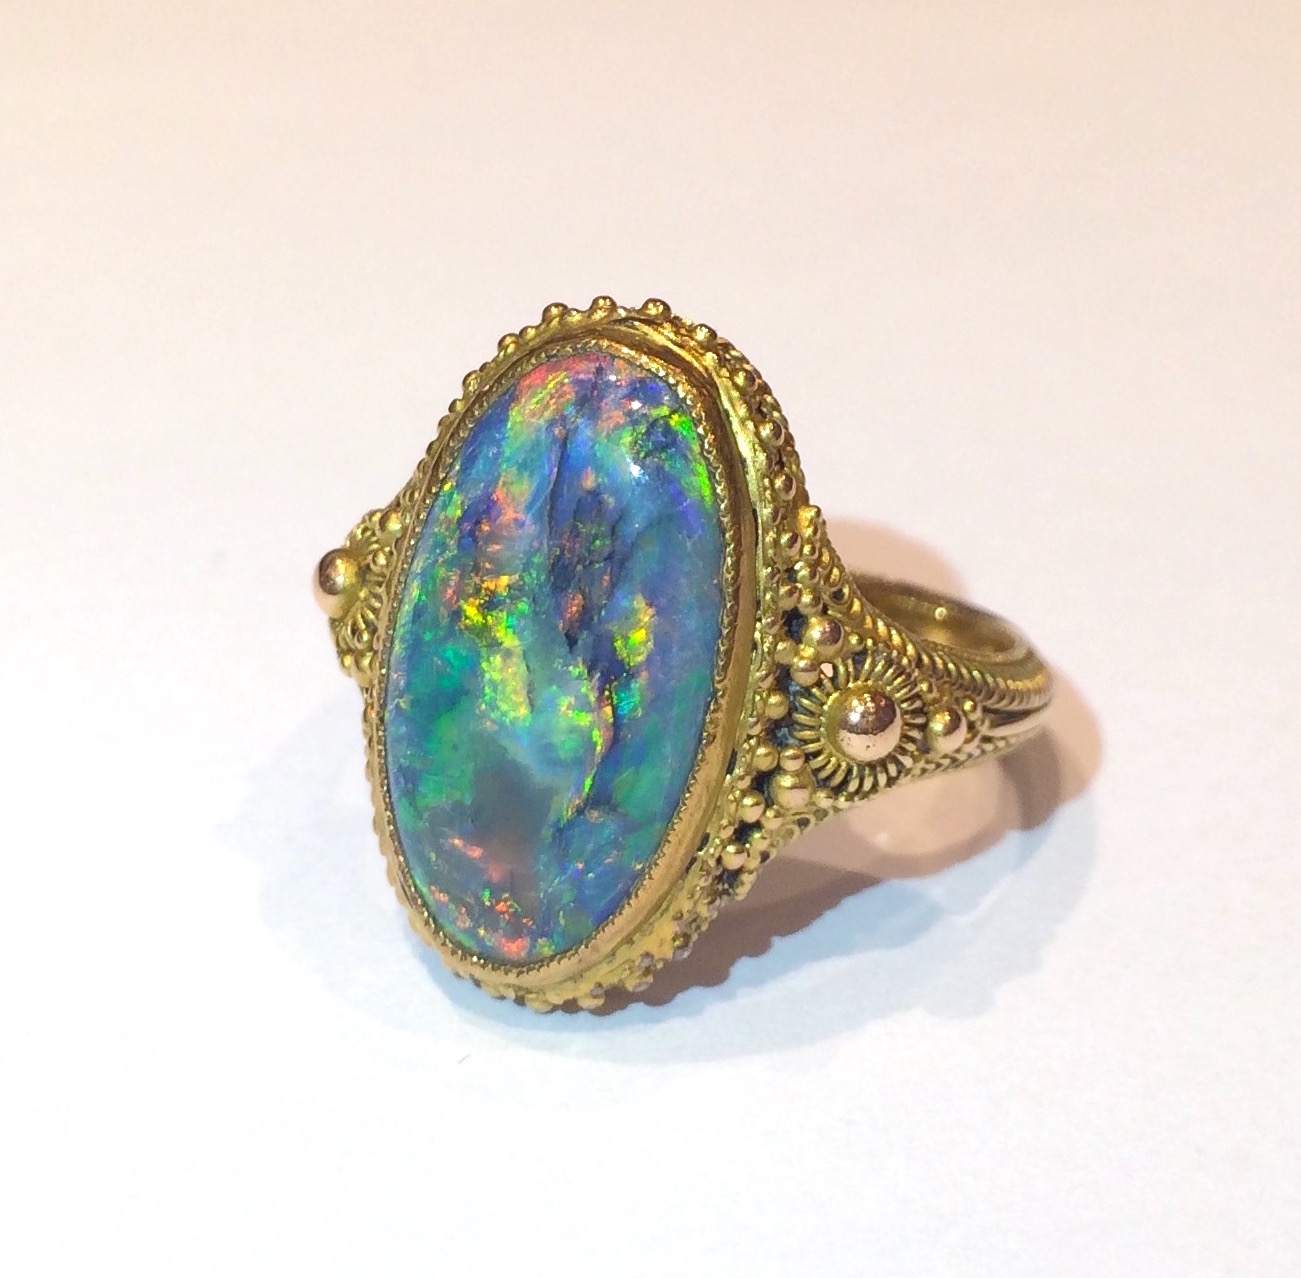 Marcus & Co. Arts & Crafts “Byzantine Revival” black opal (approx. 4 carats TW) ring in an elaborate wirework and applied beadwork 14k gold mounting, signed, c.1910